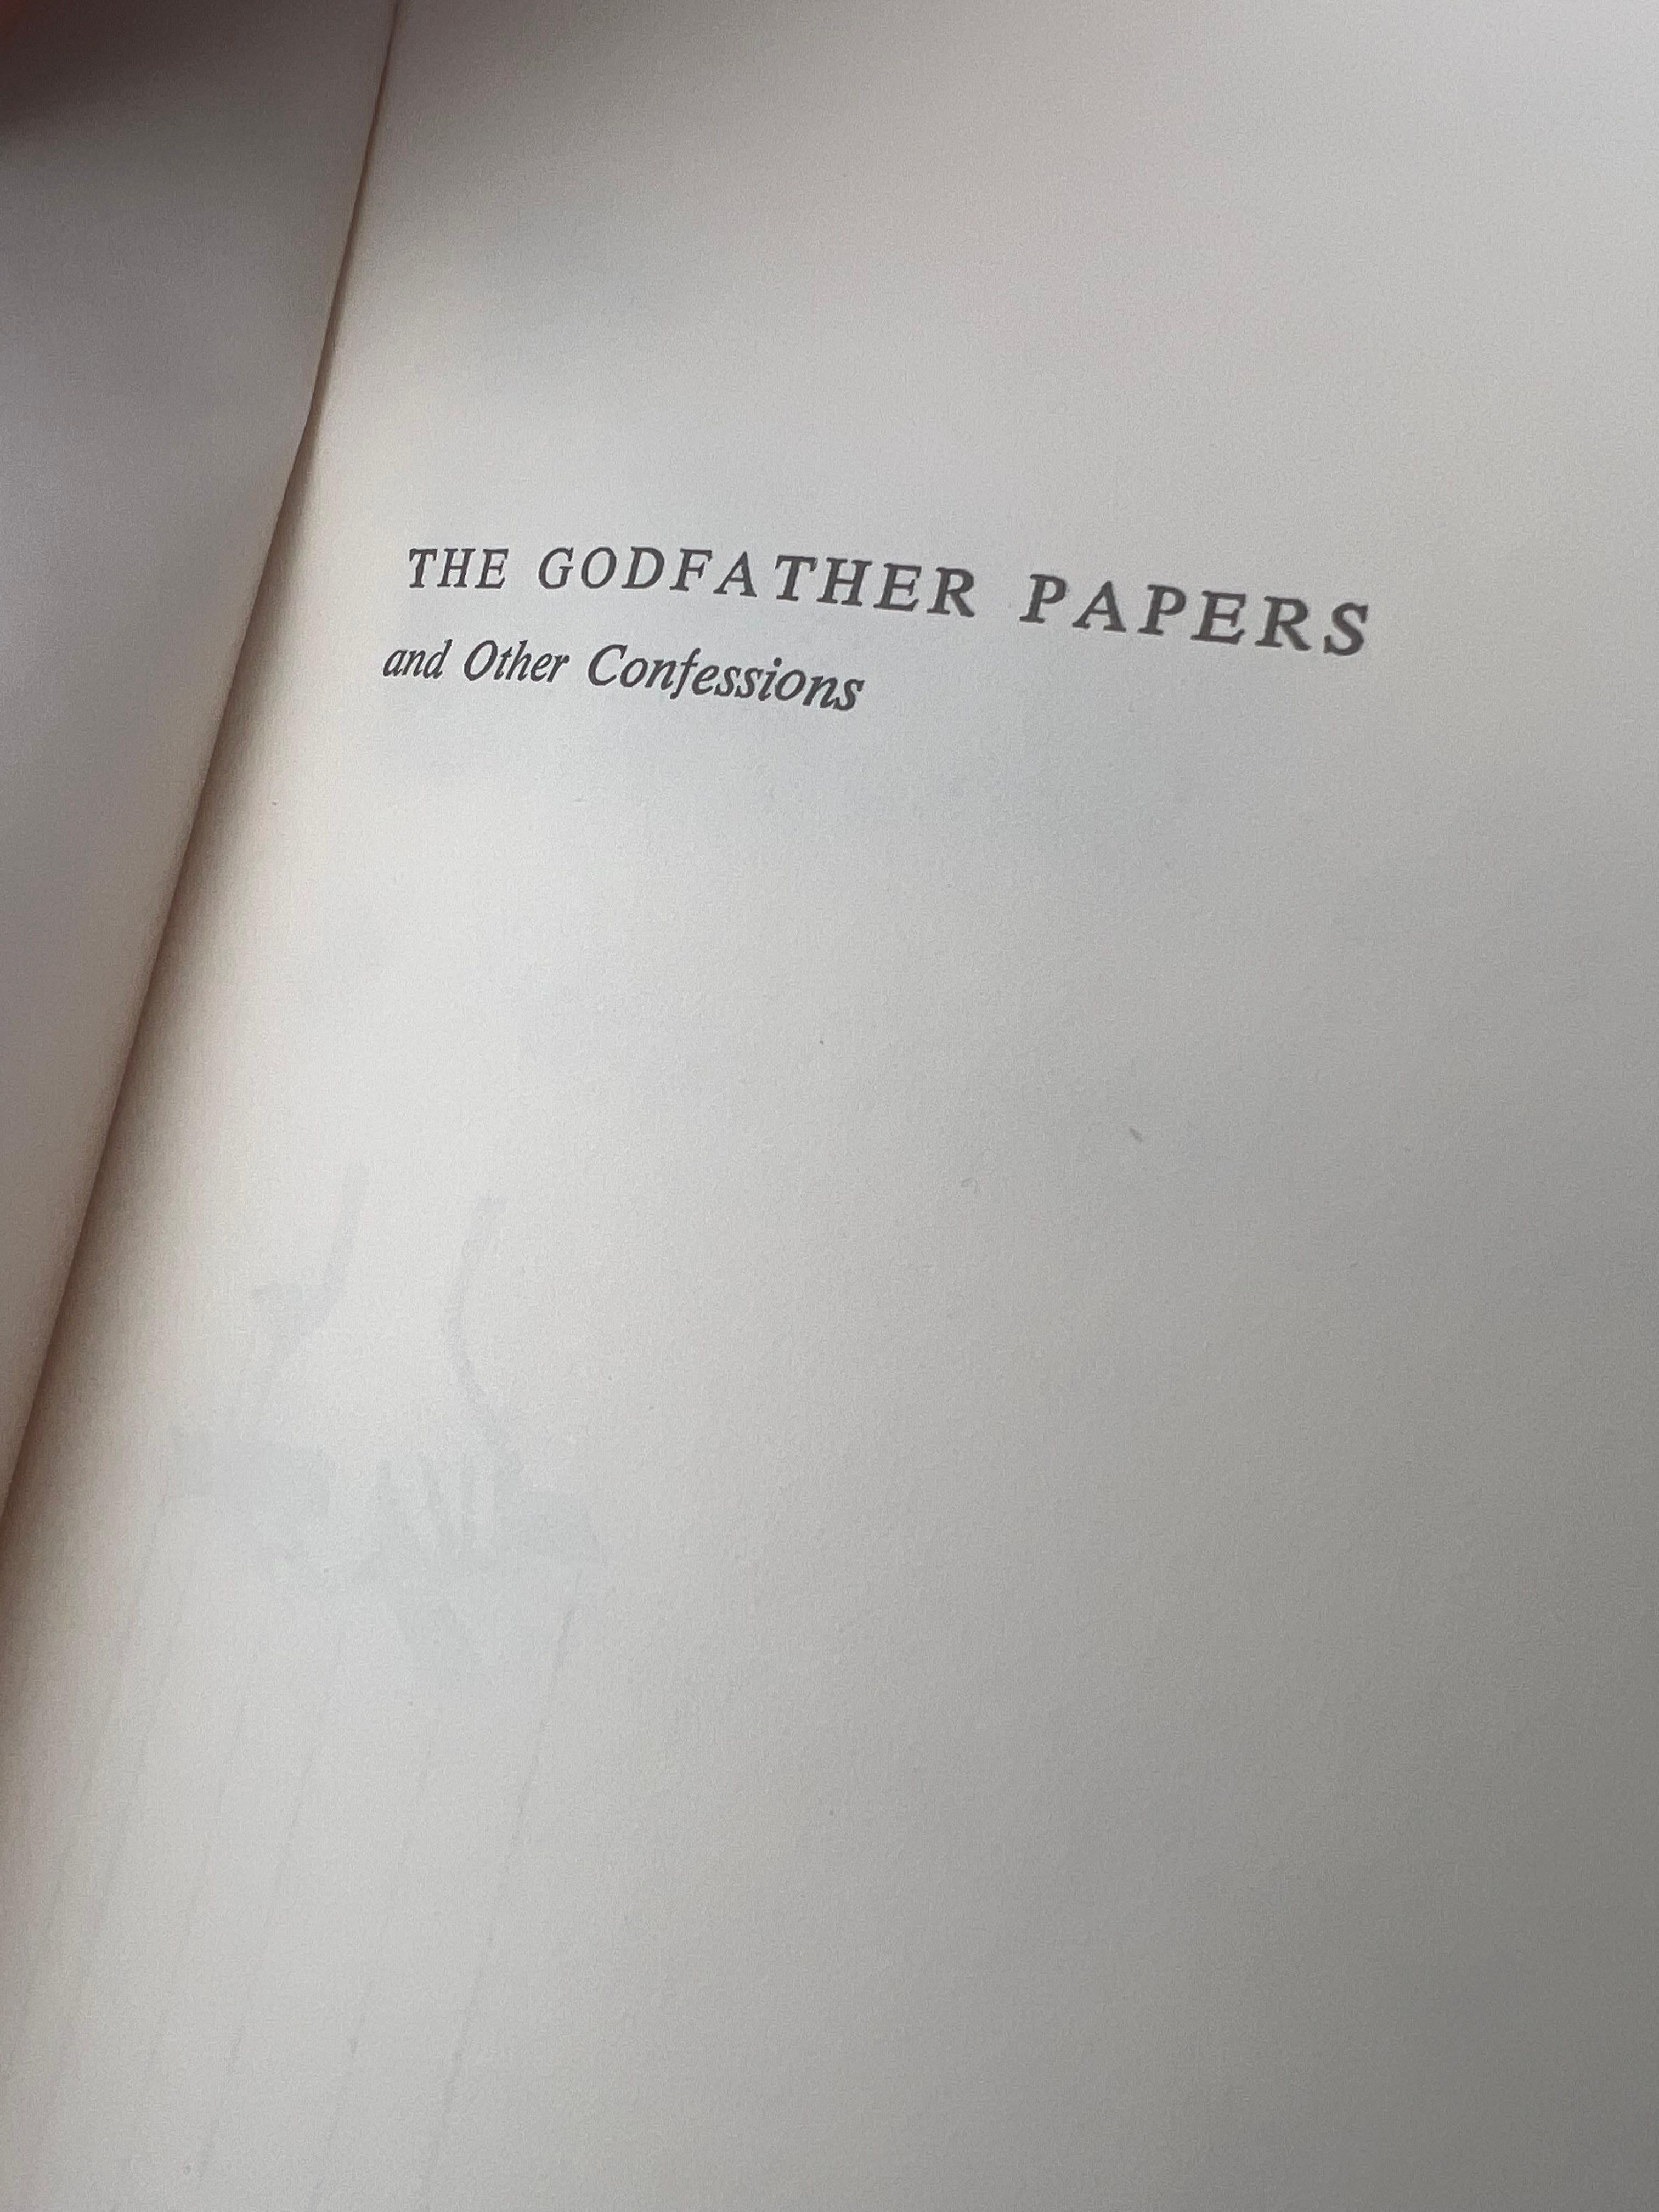 American Classical Classic The Godfather Papers Hardcover 1972 Book by Mario Puzzo